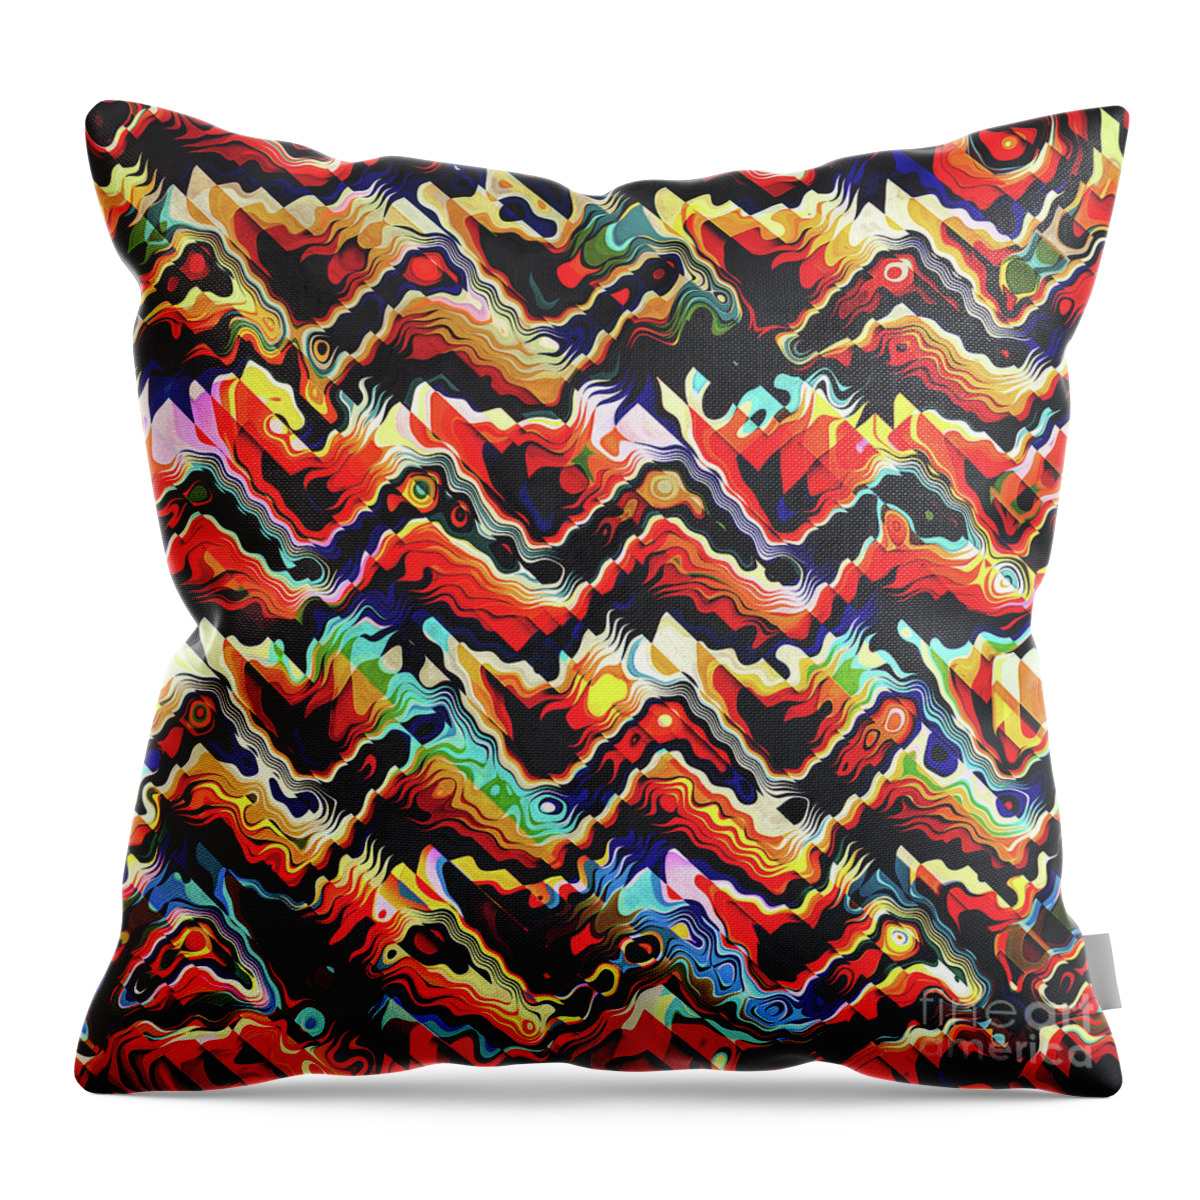 Aztec Throw Pillow featuring the digital art Colorful Geometric Motif by Phil Perkins